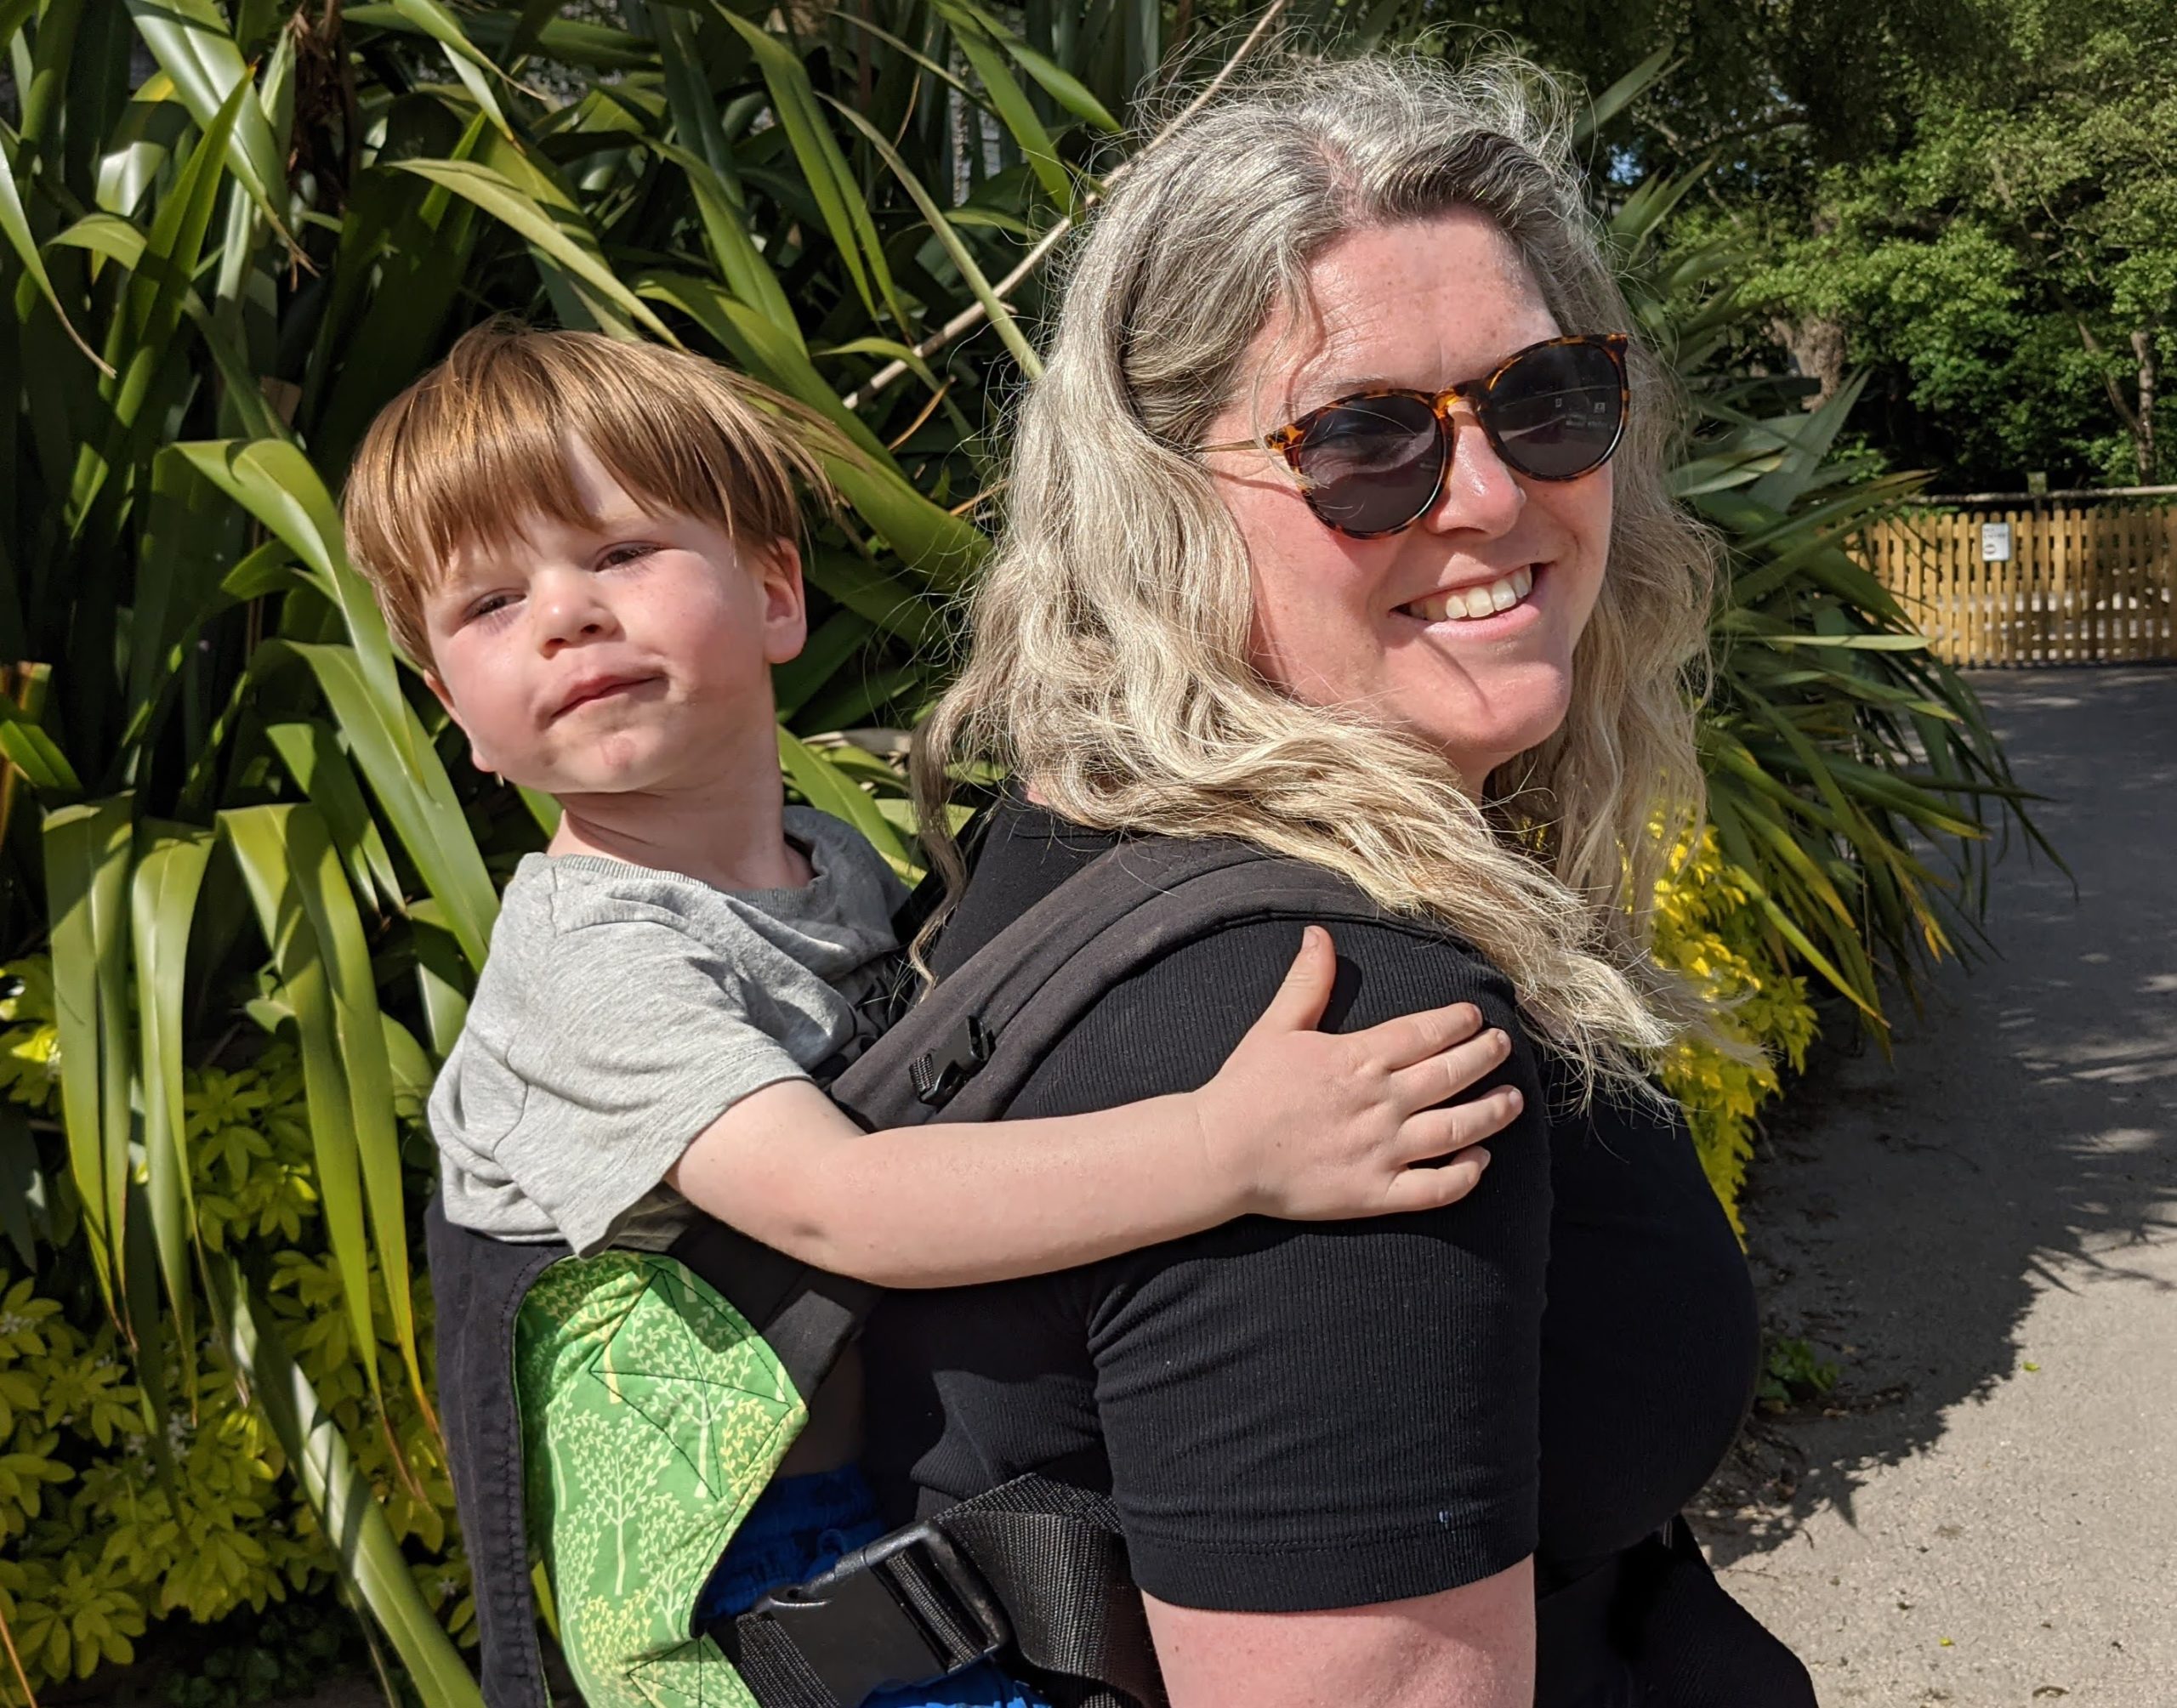 A 34 year old mum with grey hair, wearing sunglasses and smiling. On her back she caries her son in a green sling. They are outside at Drayton Manor and are enjoying their day. She is happy.